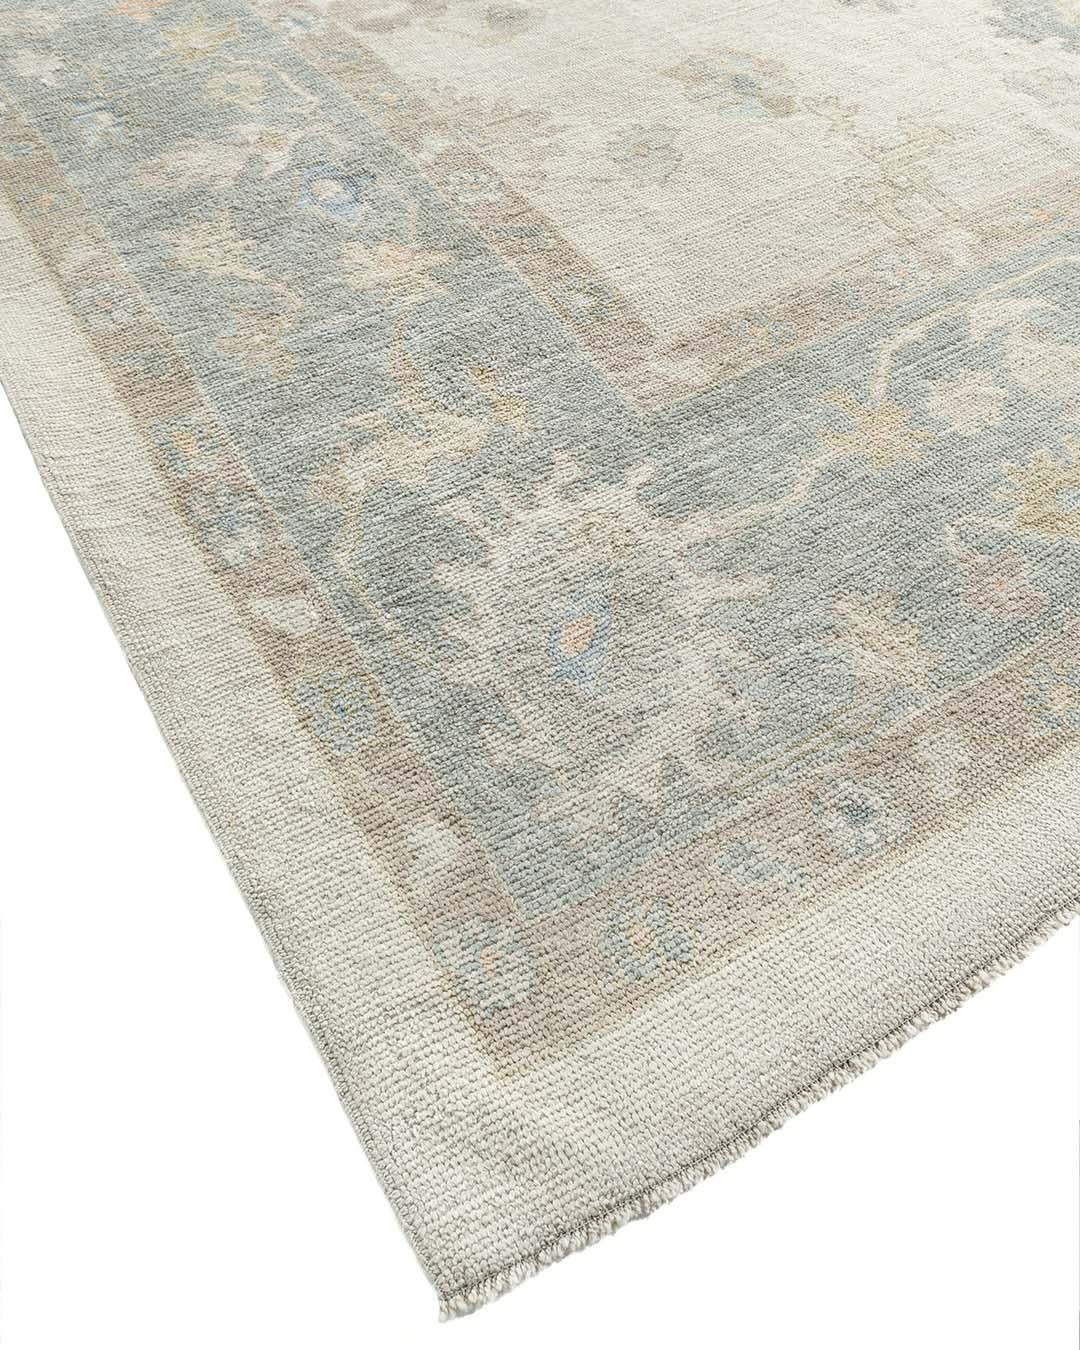 Hand-Knotted Oversize Oushak Style Handwoven Carpet Rug, 14'4 x 20'8 For Sale